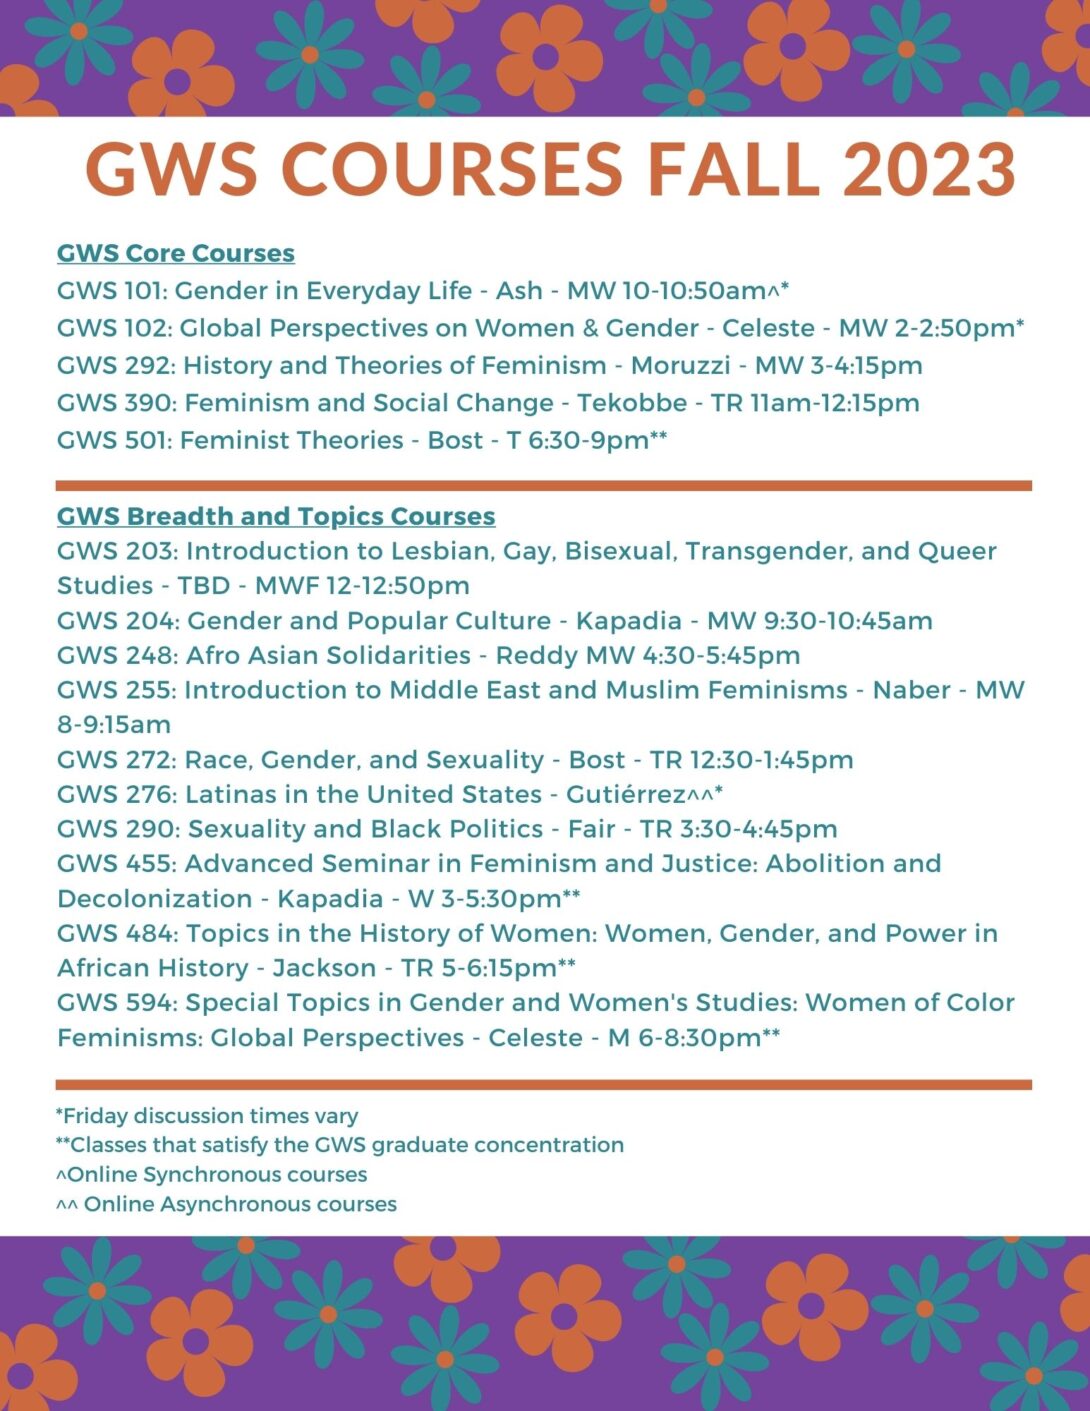 Small teal, orange, and purple flowers form a border at the top and bottom of the flier. GWS courses are listed in orange and teal text.